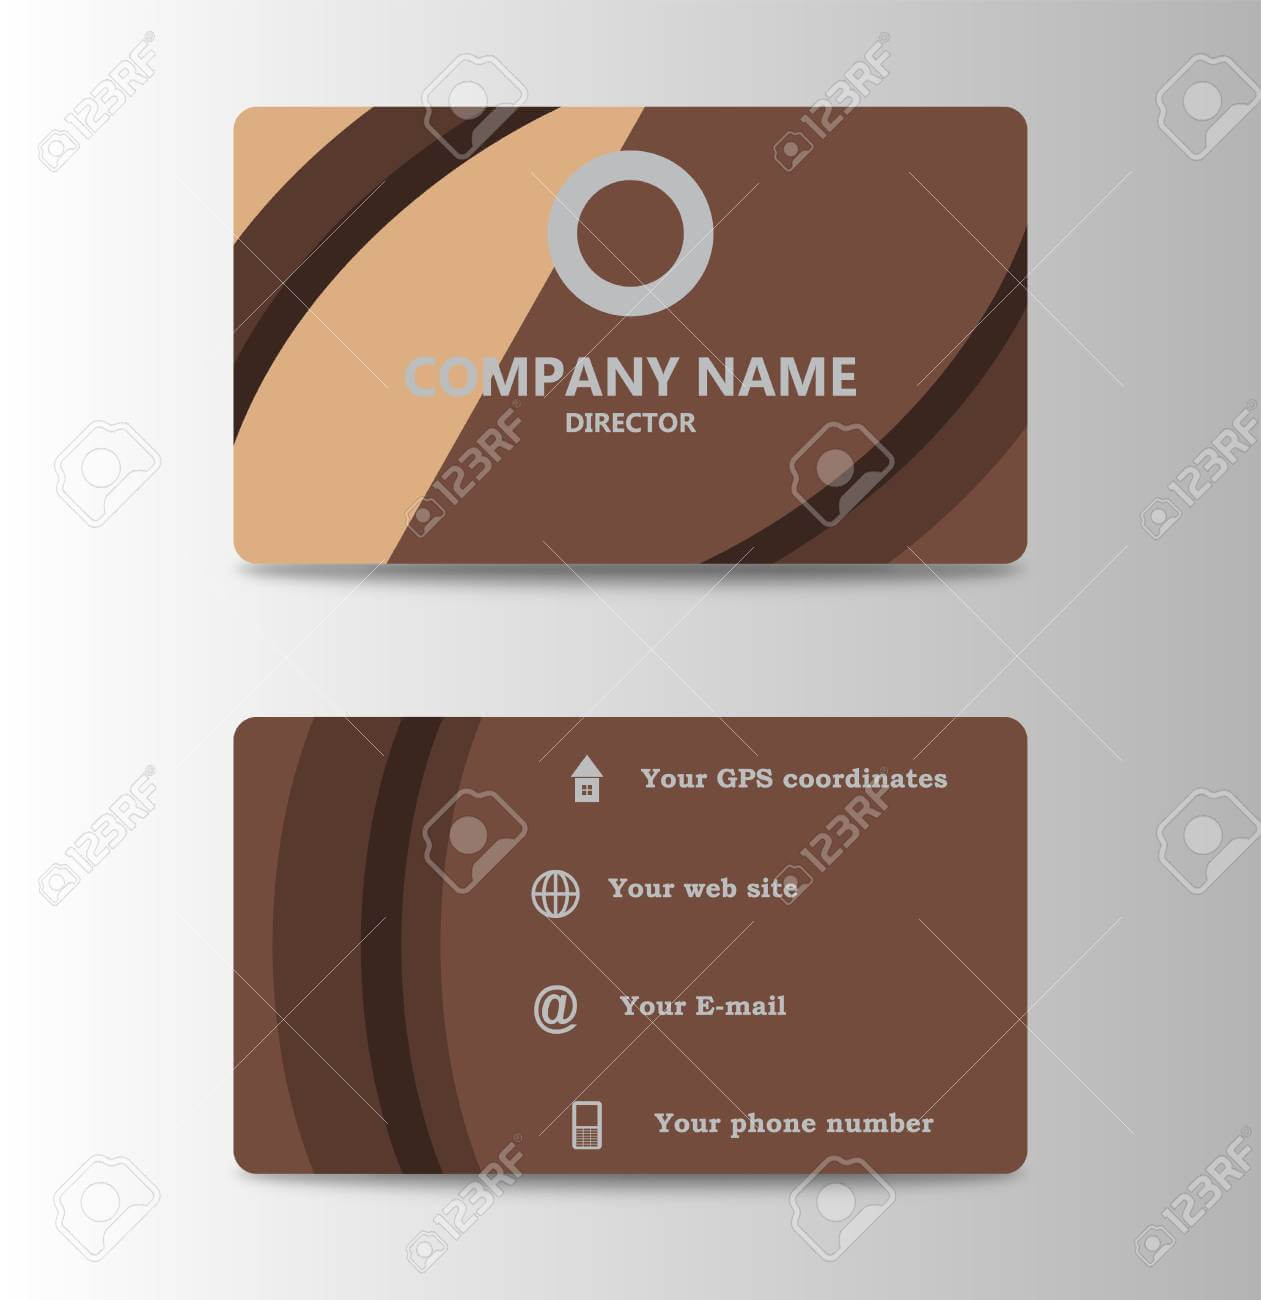 Corporate Id Card Design Template. Personal Id Card For Business.. Throughout Personal Identification Card Template